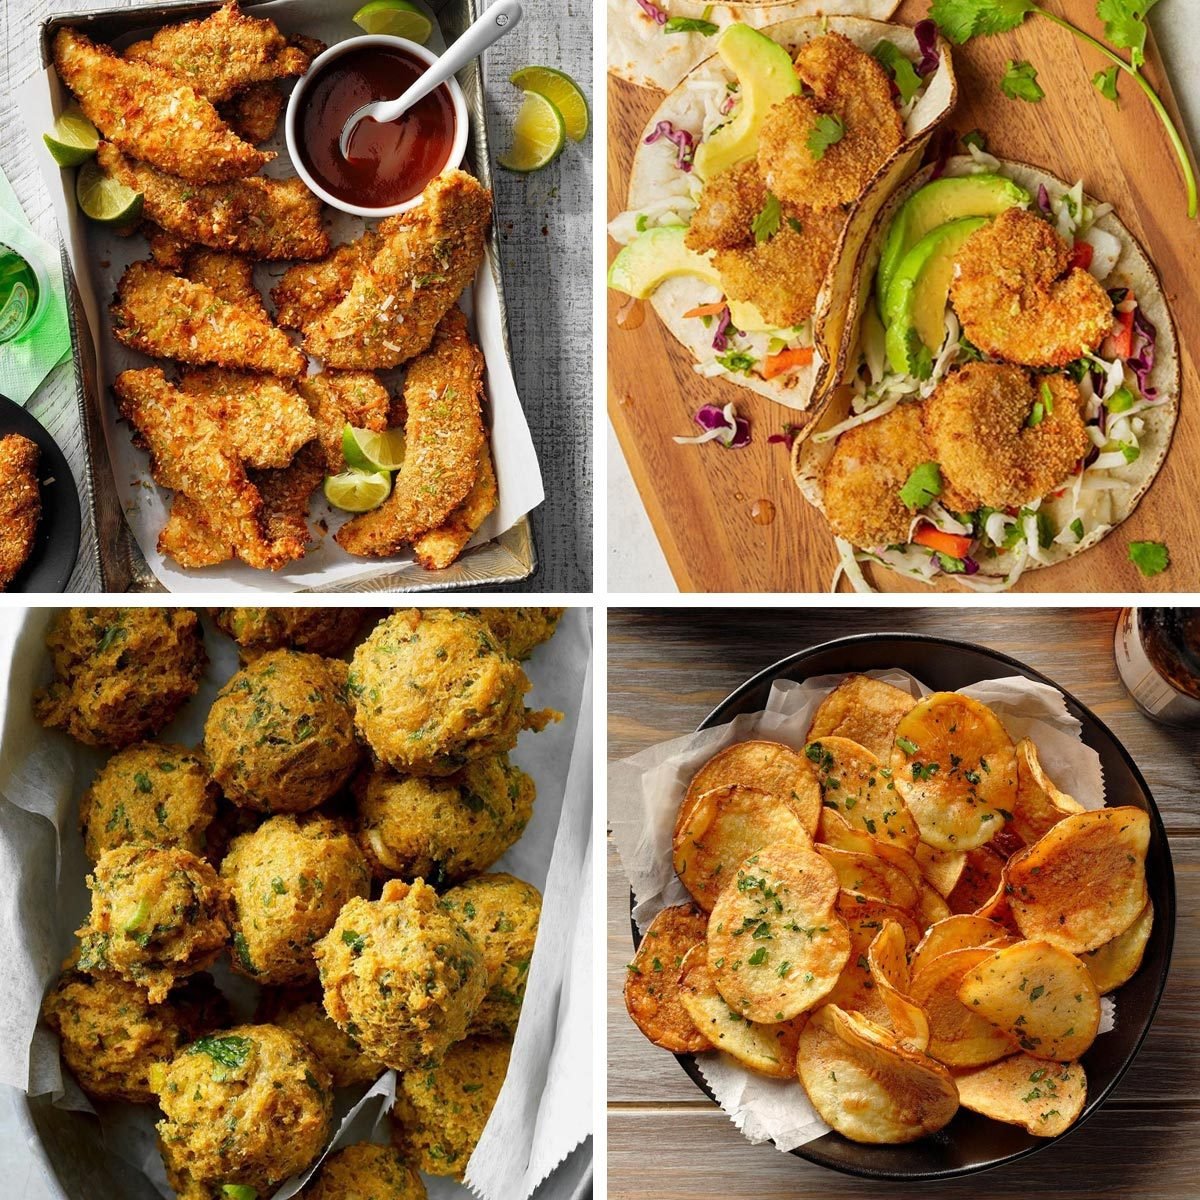 https://www.tasteofhome.com/wp-content/uploads/2023/11/42-Healthy-Air-Fryer-Recipes-You-Need-to-Try_2x2-grid_sq.jpg